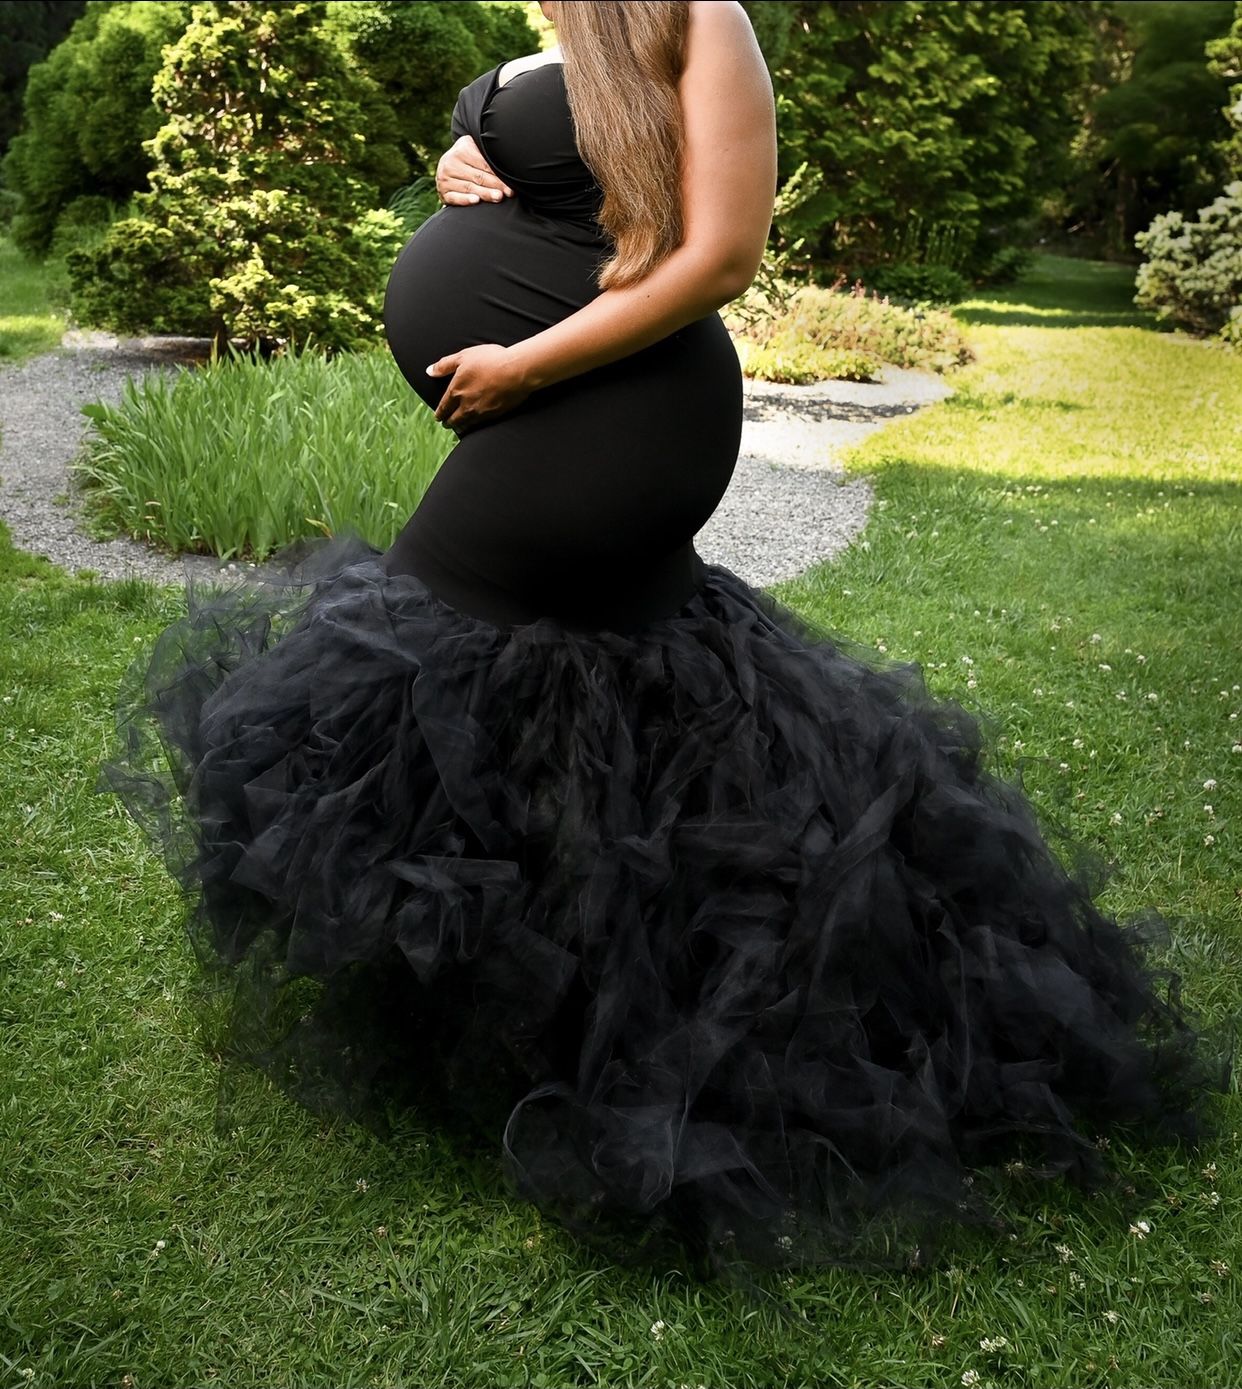 Black Maternity Mermaid Strapless Sweetheart Gown With Tulle Bottom Size XL